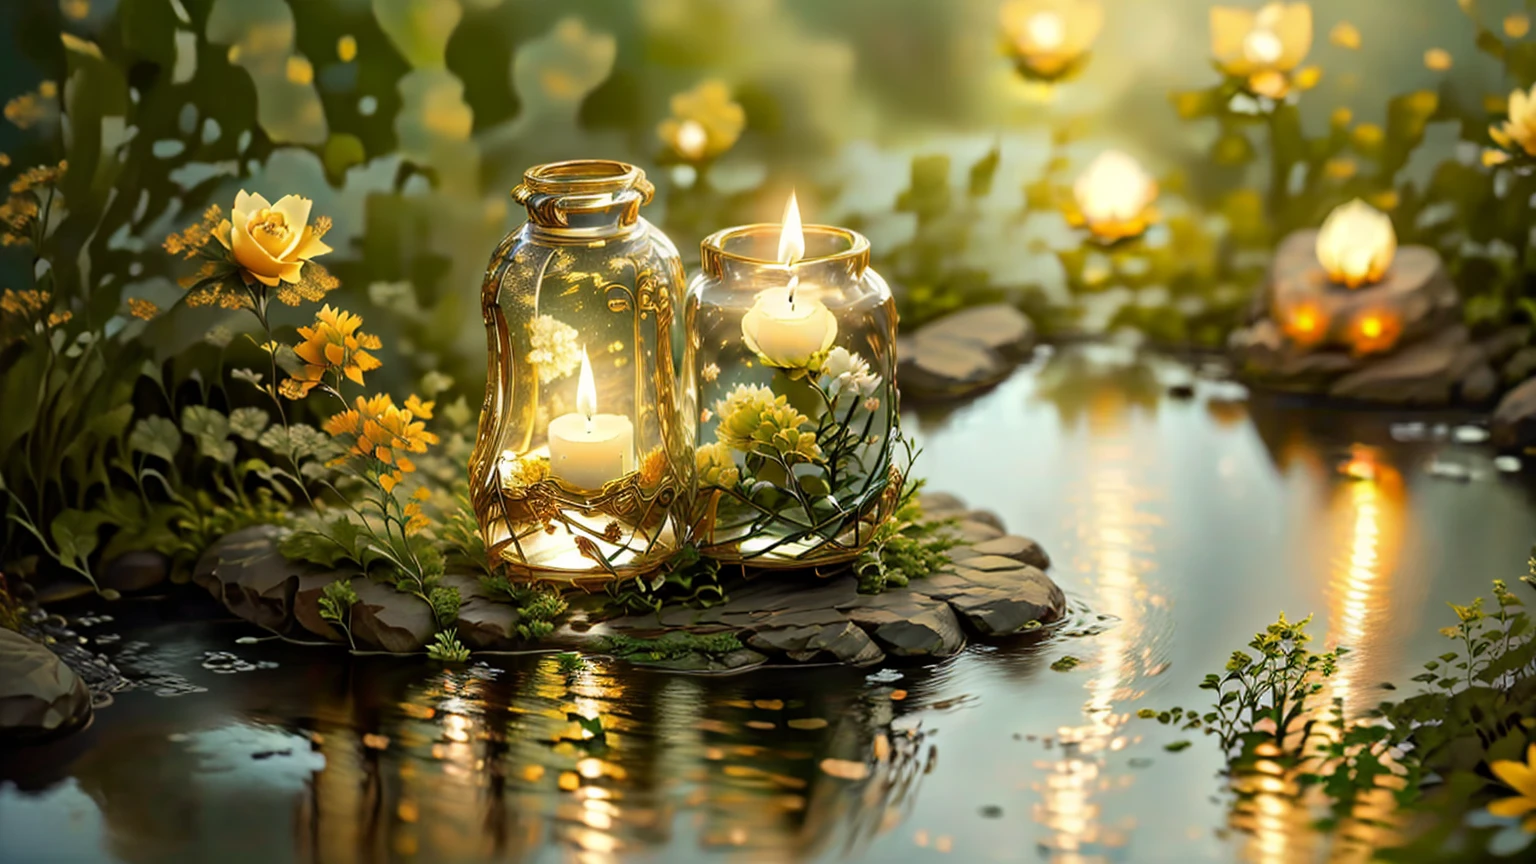 A candle and a stone are placed in a pond filled with water., Peaceful atmosphere, relax atmosphere, relax, Warm and fun atmosphere, relax environment, Beautiful atmosphere, Beautiful atmosphere, Serene landscape, very relax, Floating Candles, Peaceful environment, relax mood, Quiet environment, Shutterstock, Peaceful atmosphere, Soft glow, Magical Scene, Warm and beautiful scenery, spa, Calm evening atmosphere